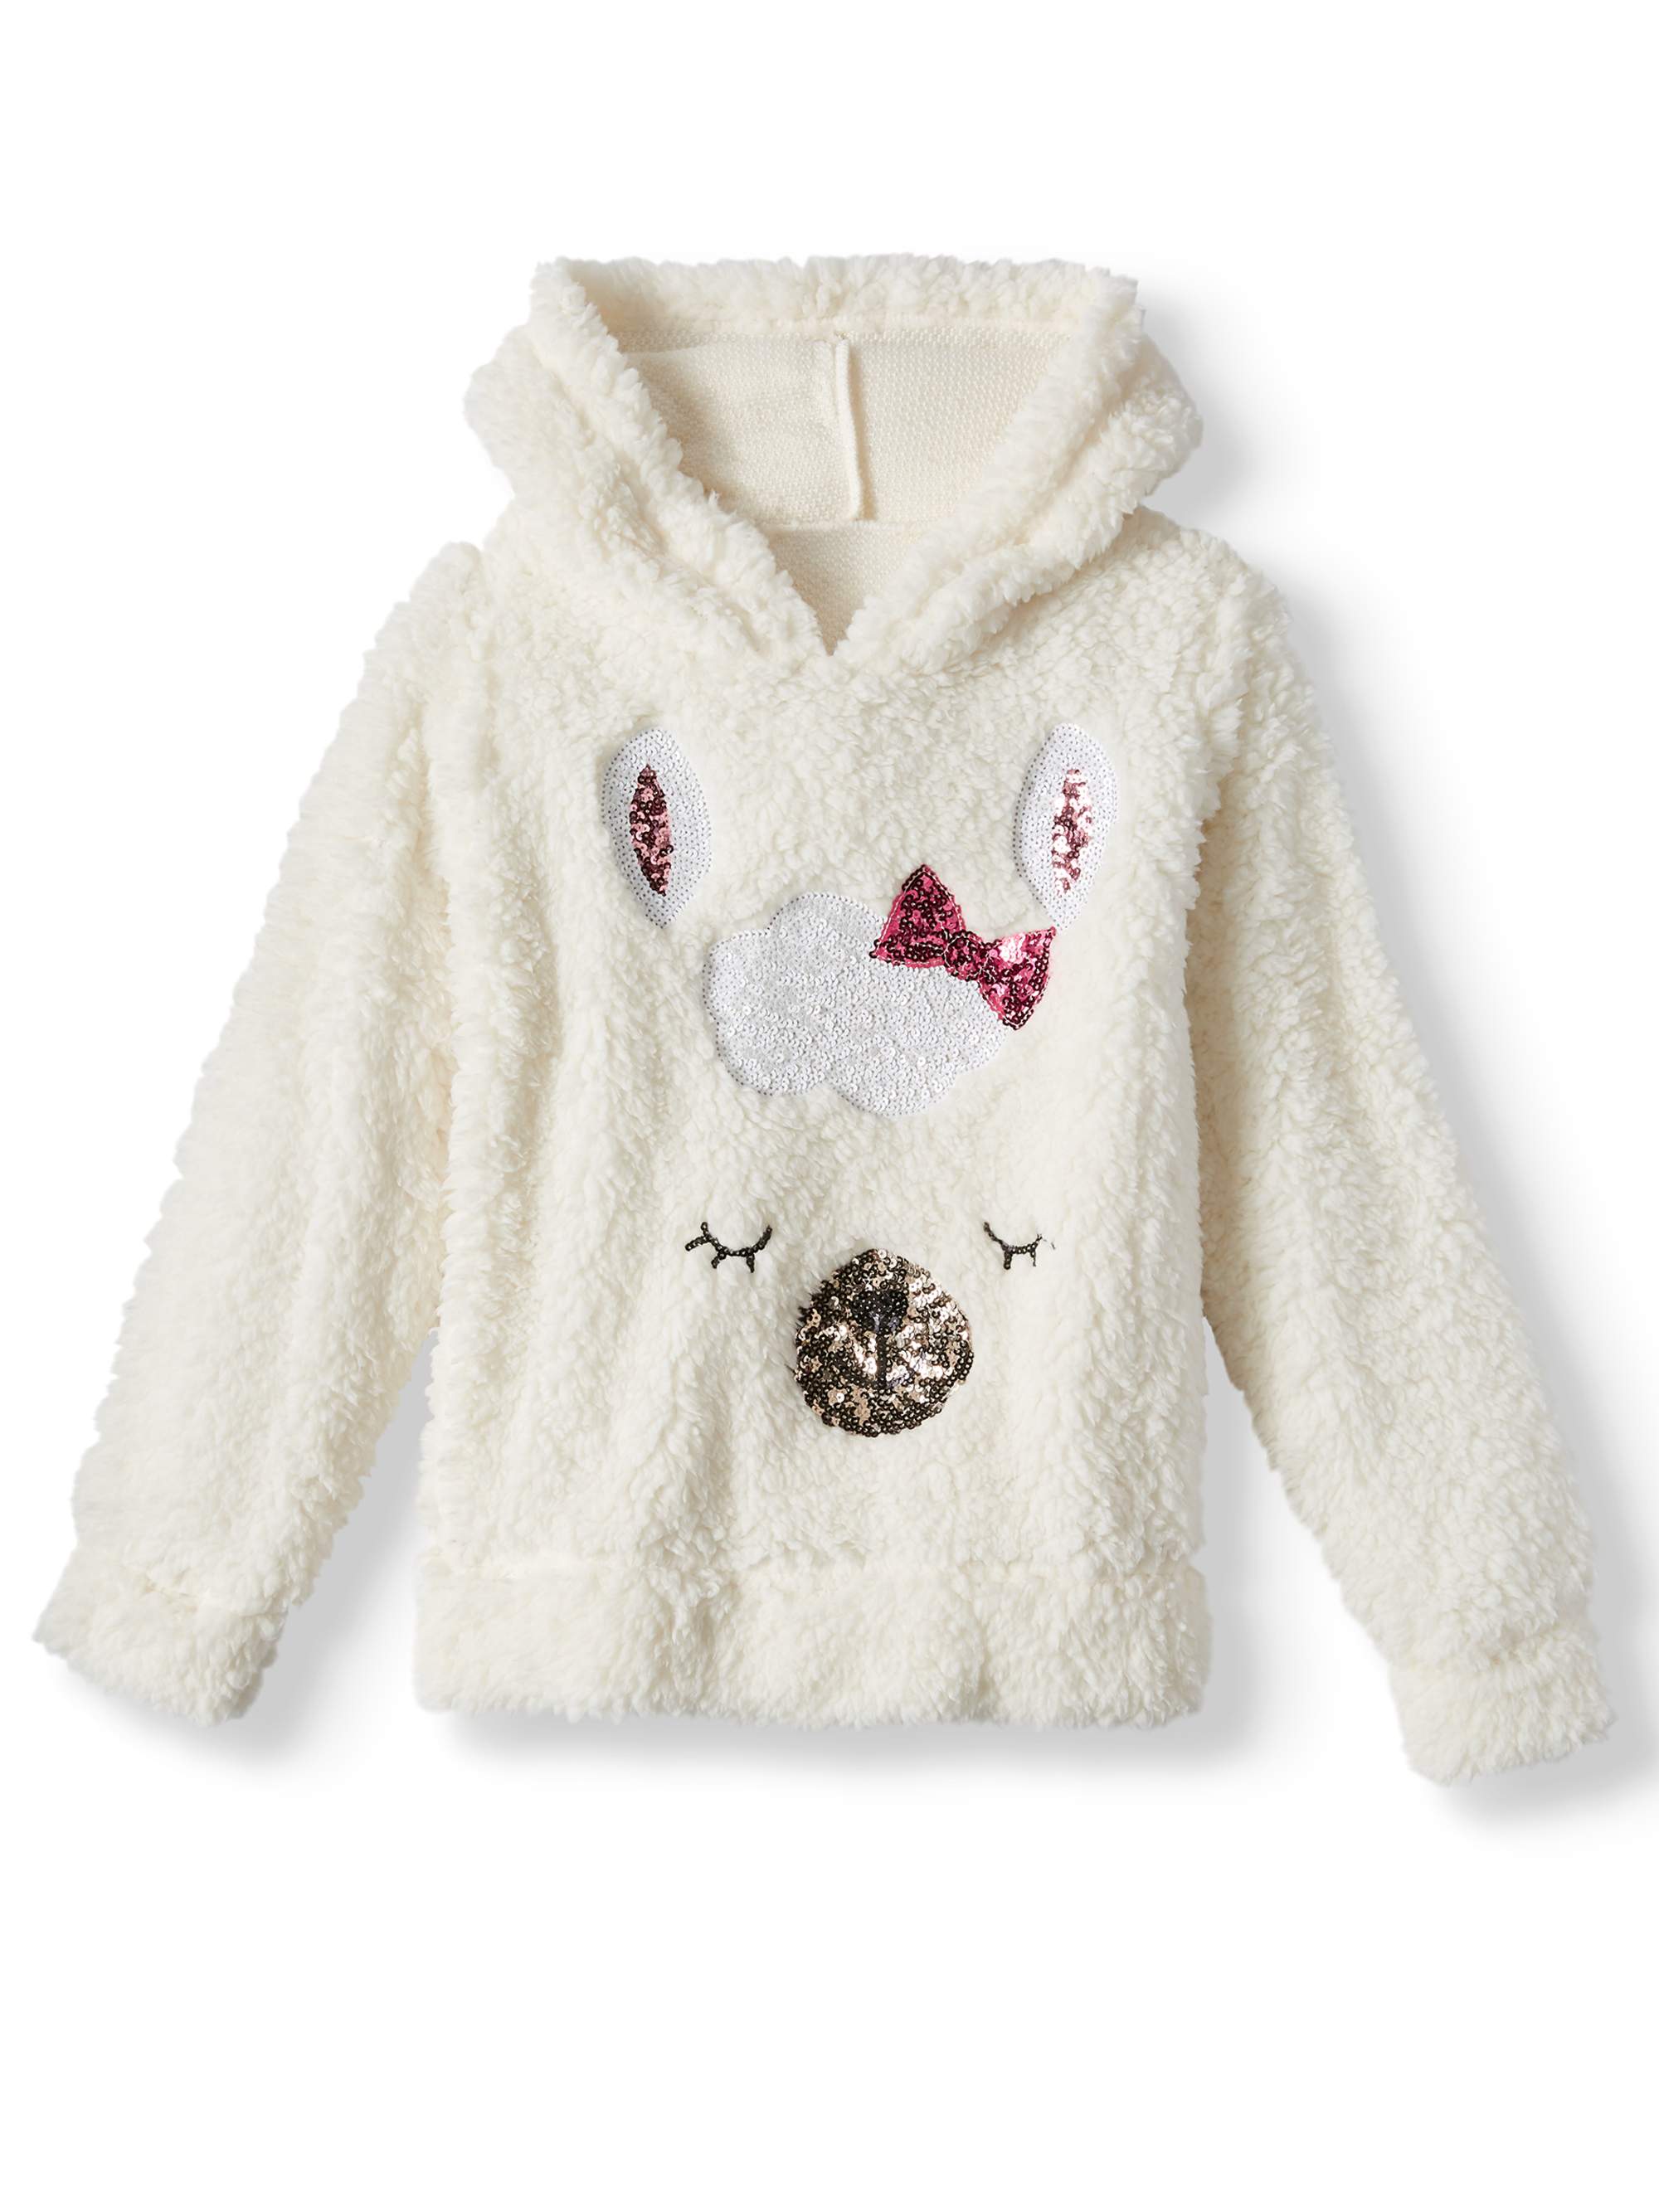 Miss Chievous Sequin Critter Plush Sherpa Hoodie (Little Girls & Big Girls) - image 1 of 3